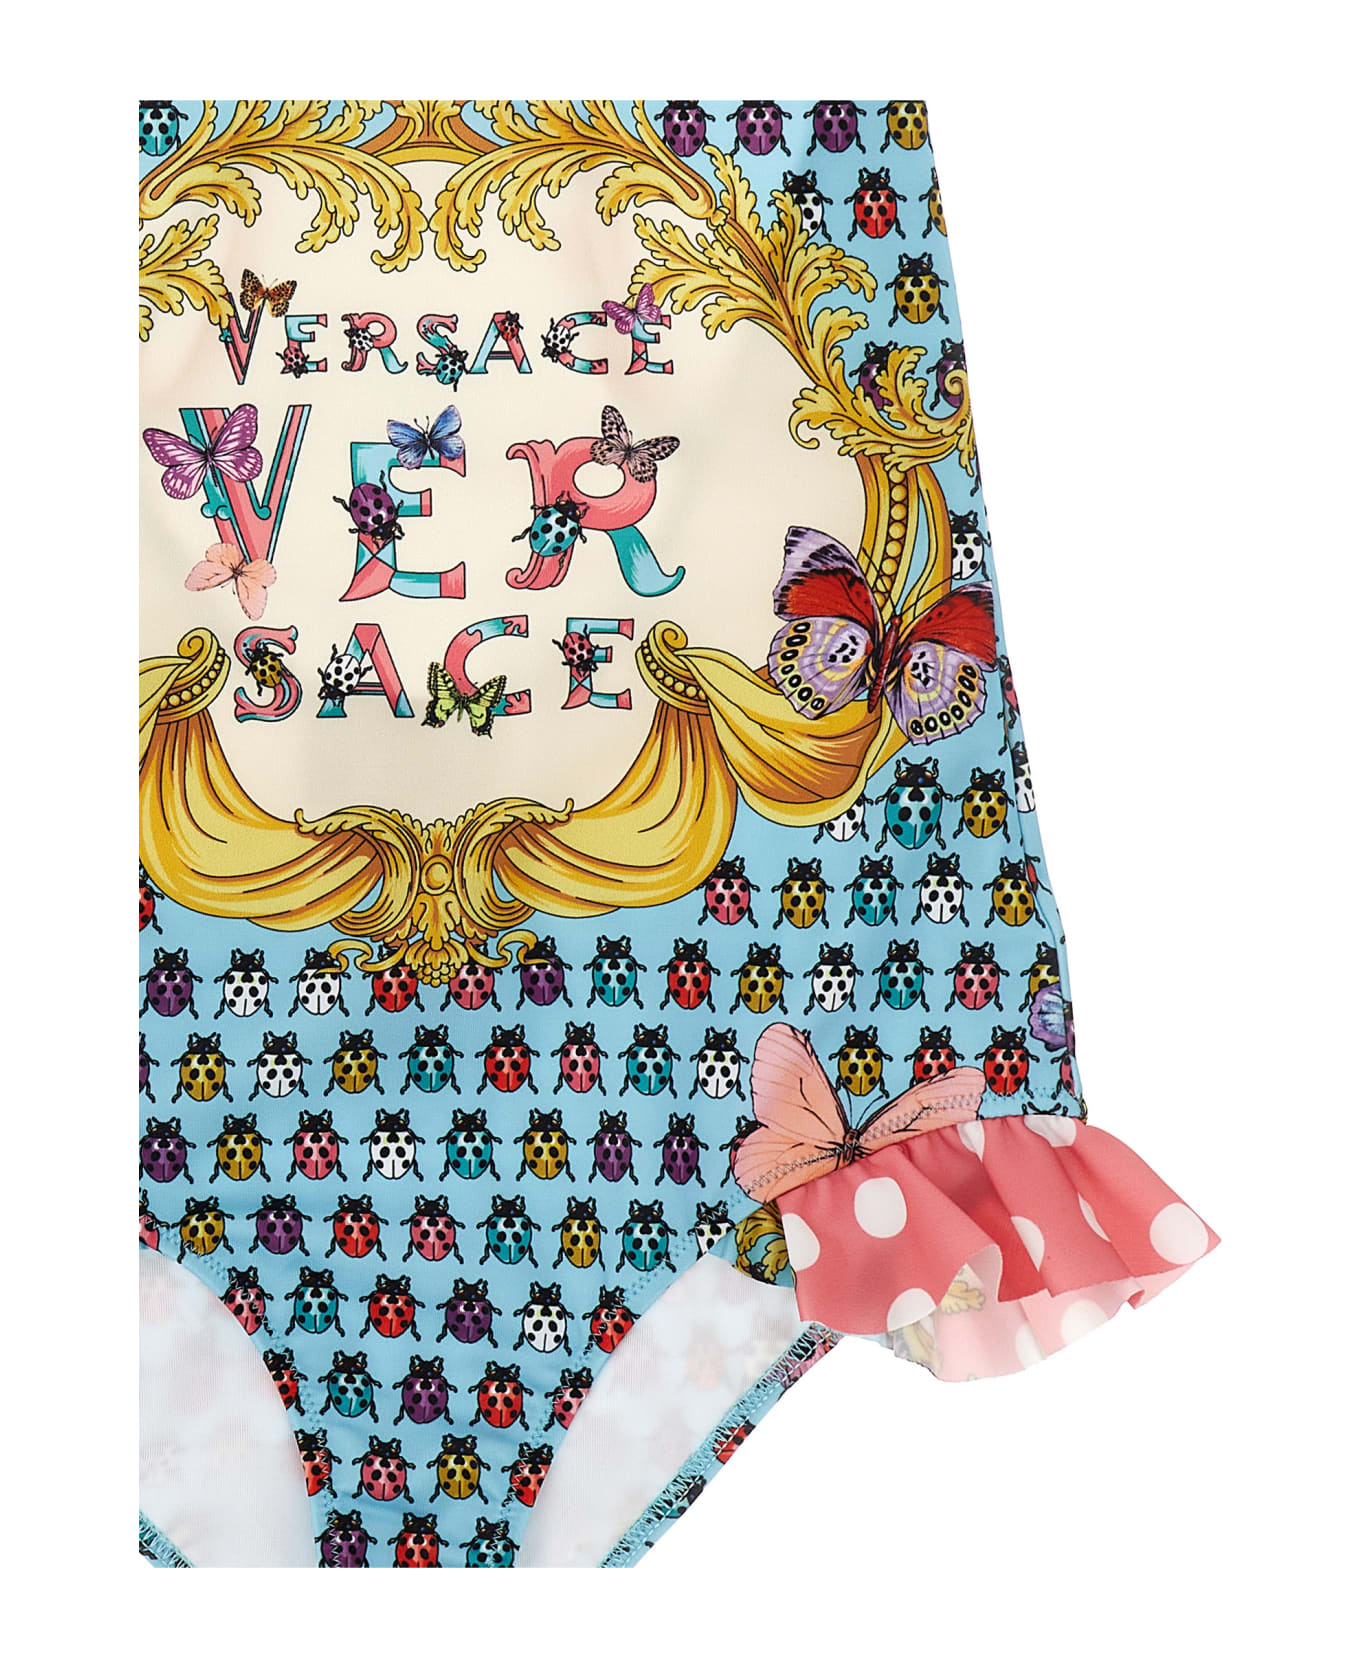 Versace 'heritage Butterflies And Ladybugs Kids' One-piece Swimsuit With La Vacanza Capsule - Pink